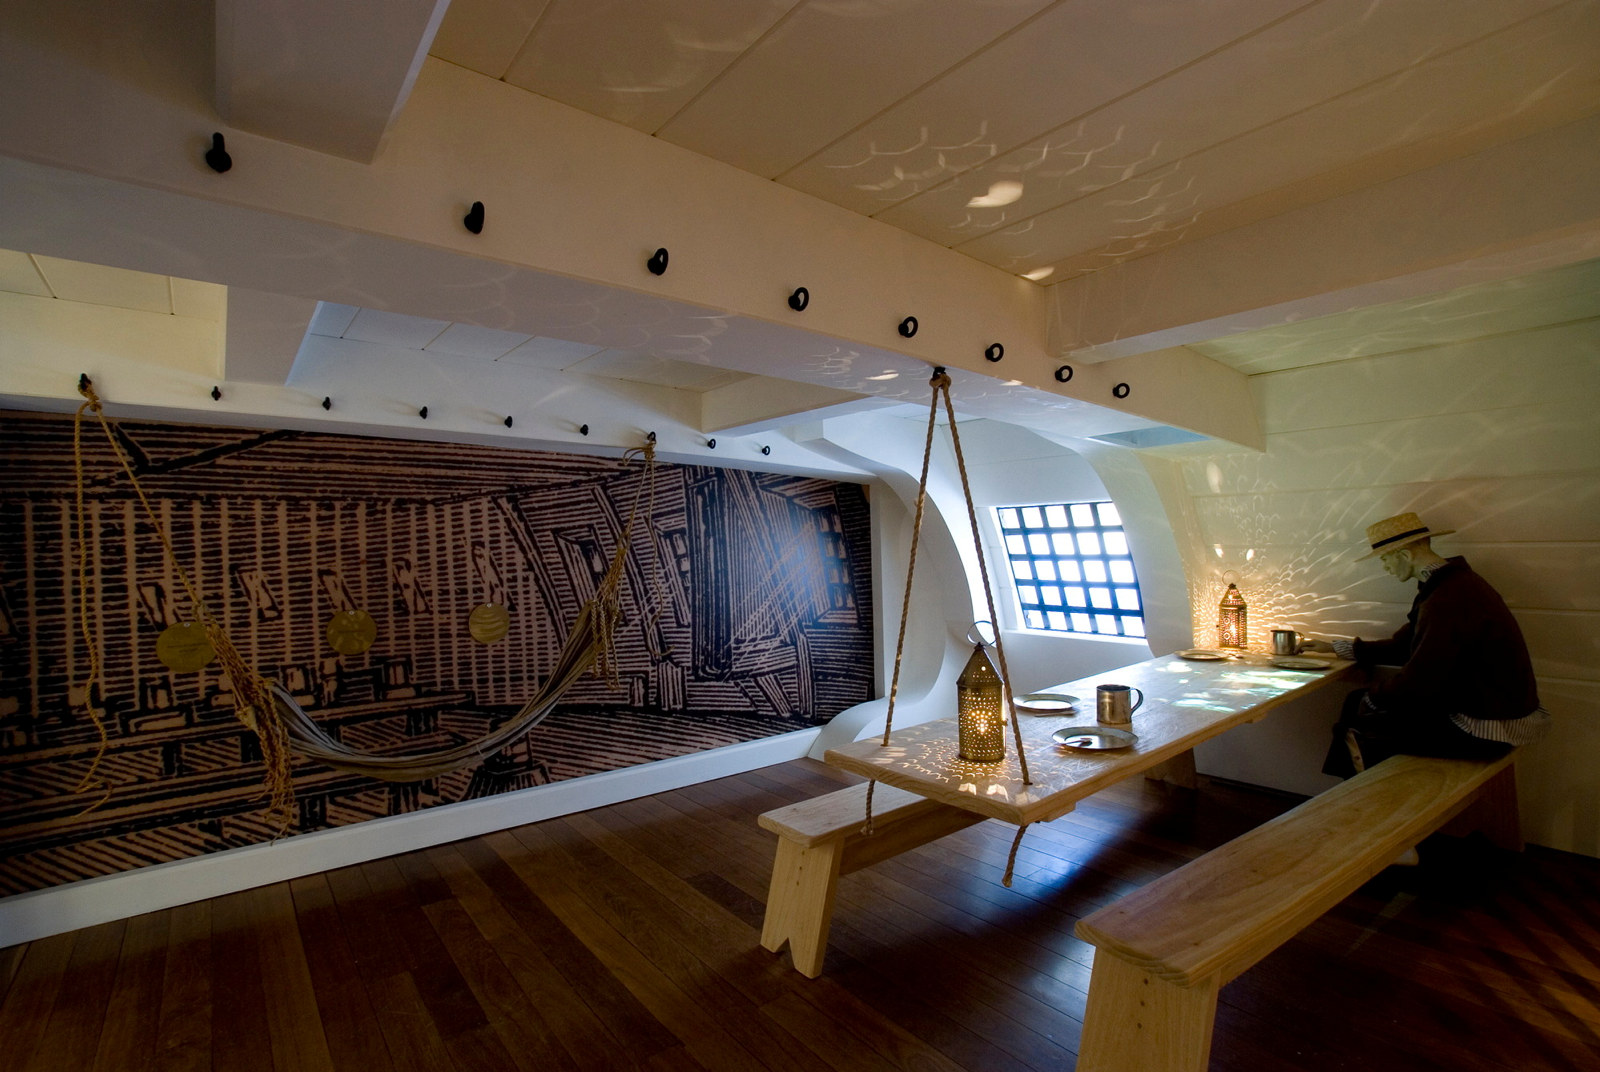 Exhibition installation; hulk cabin with wooden panelling, beams, convict figure